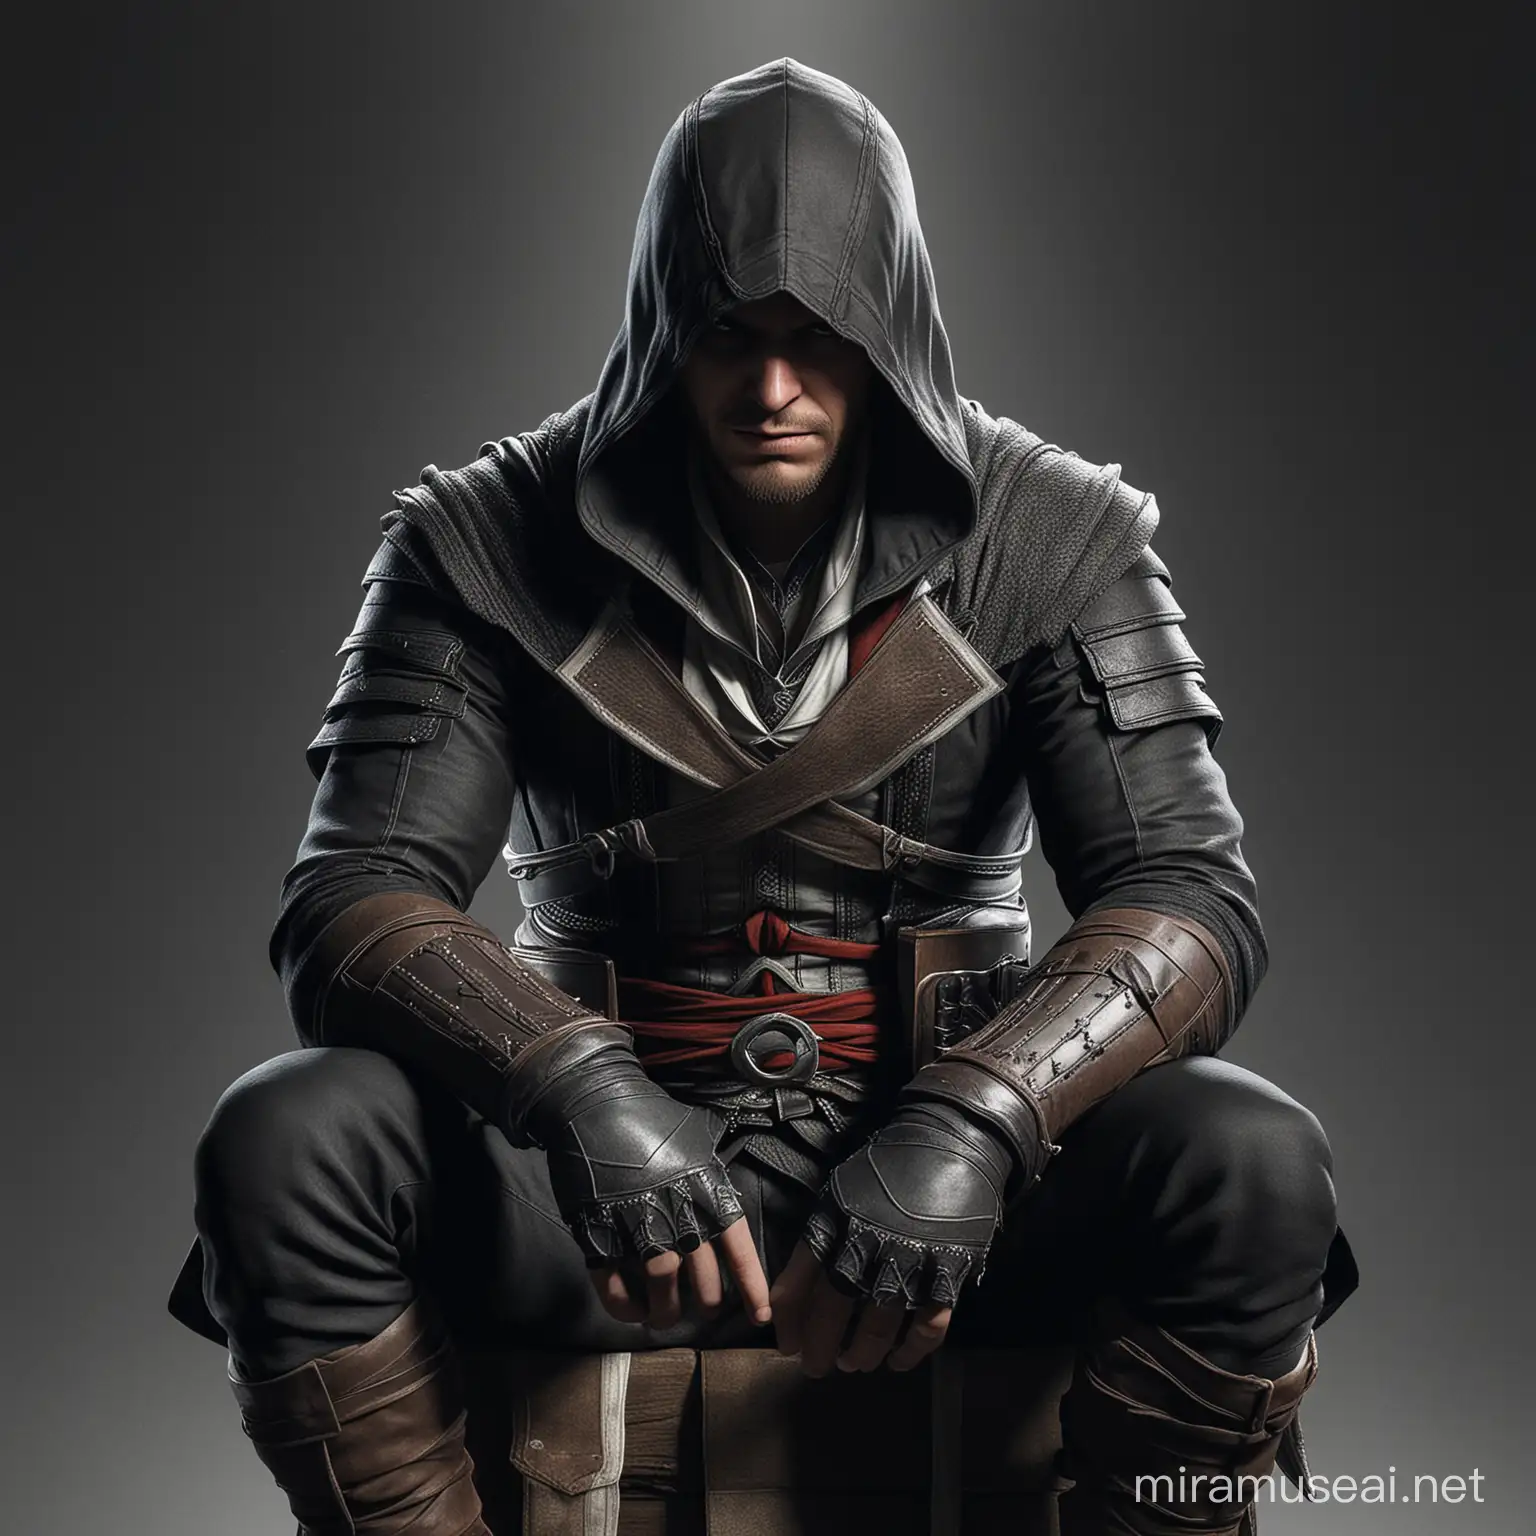 Stealthy Assassin in Black Outfit Sitting Facing Forward